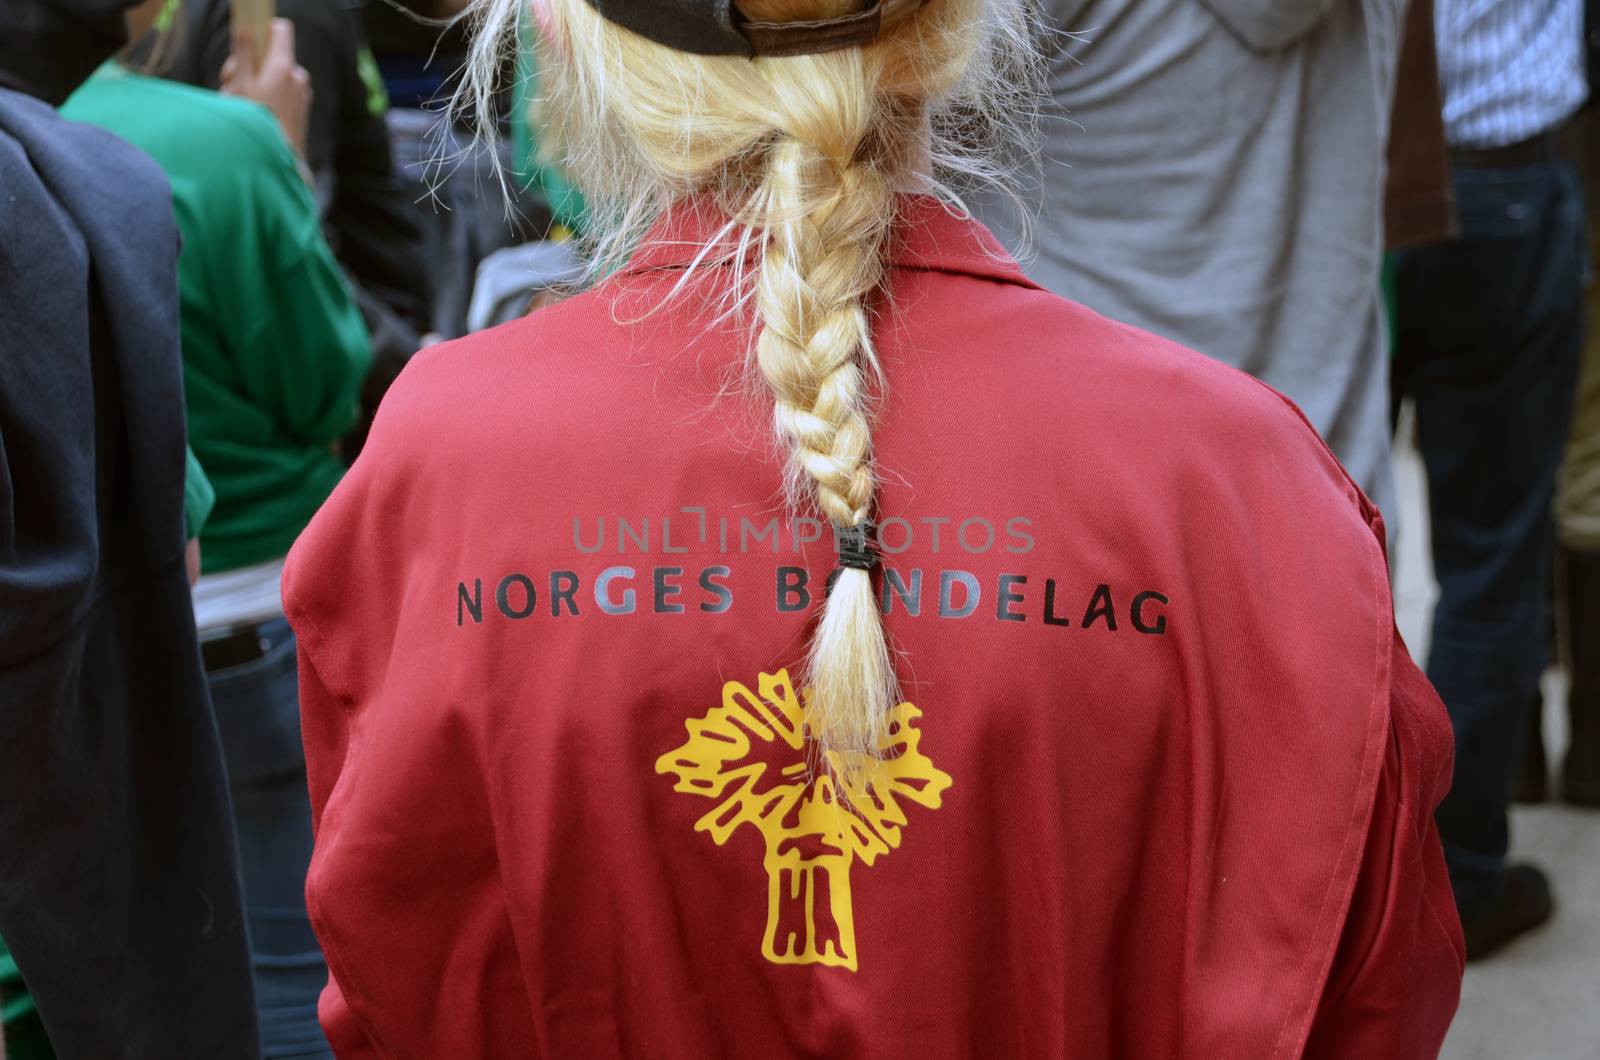 A female Norwegian farmer protest the Norwegian government's agricultural policies during a rally organized by the Norwegian Agrarian Association (Norsk Bondelag) in Oslo.